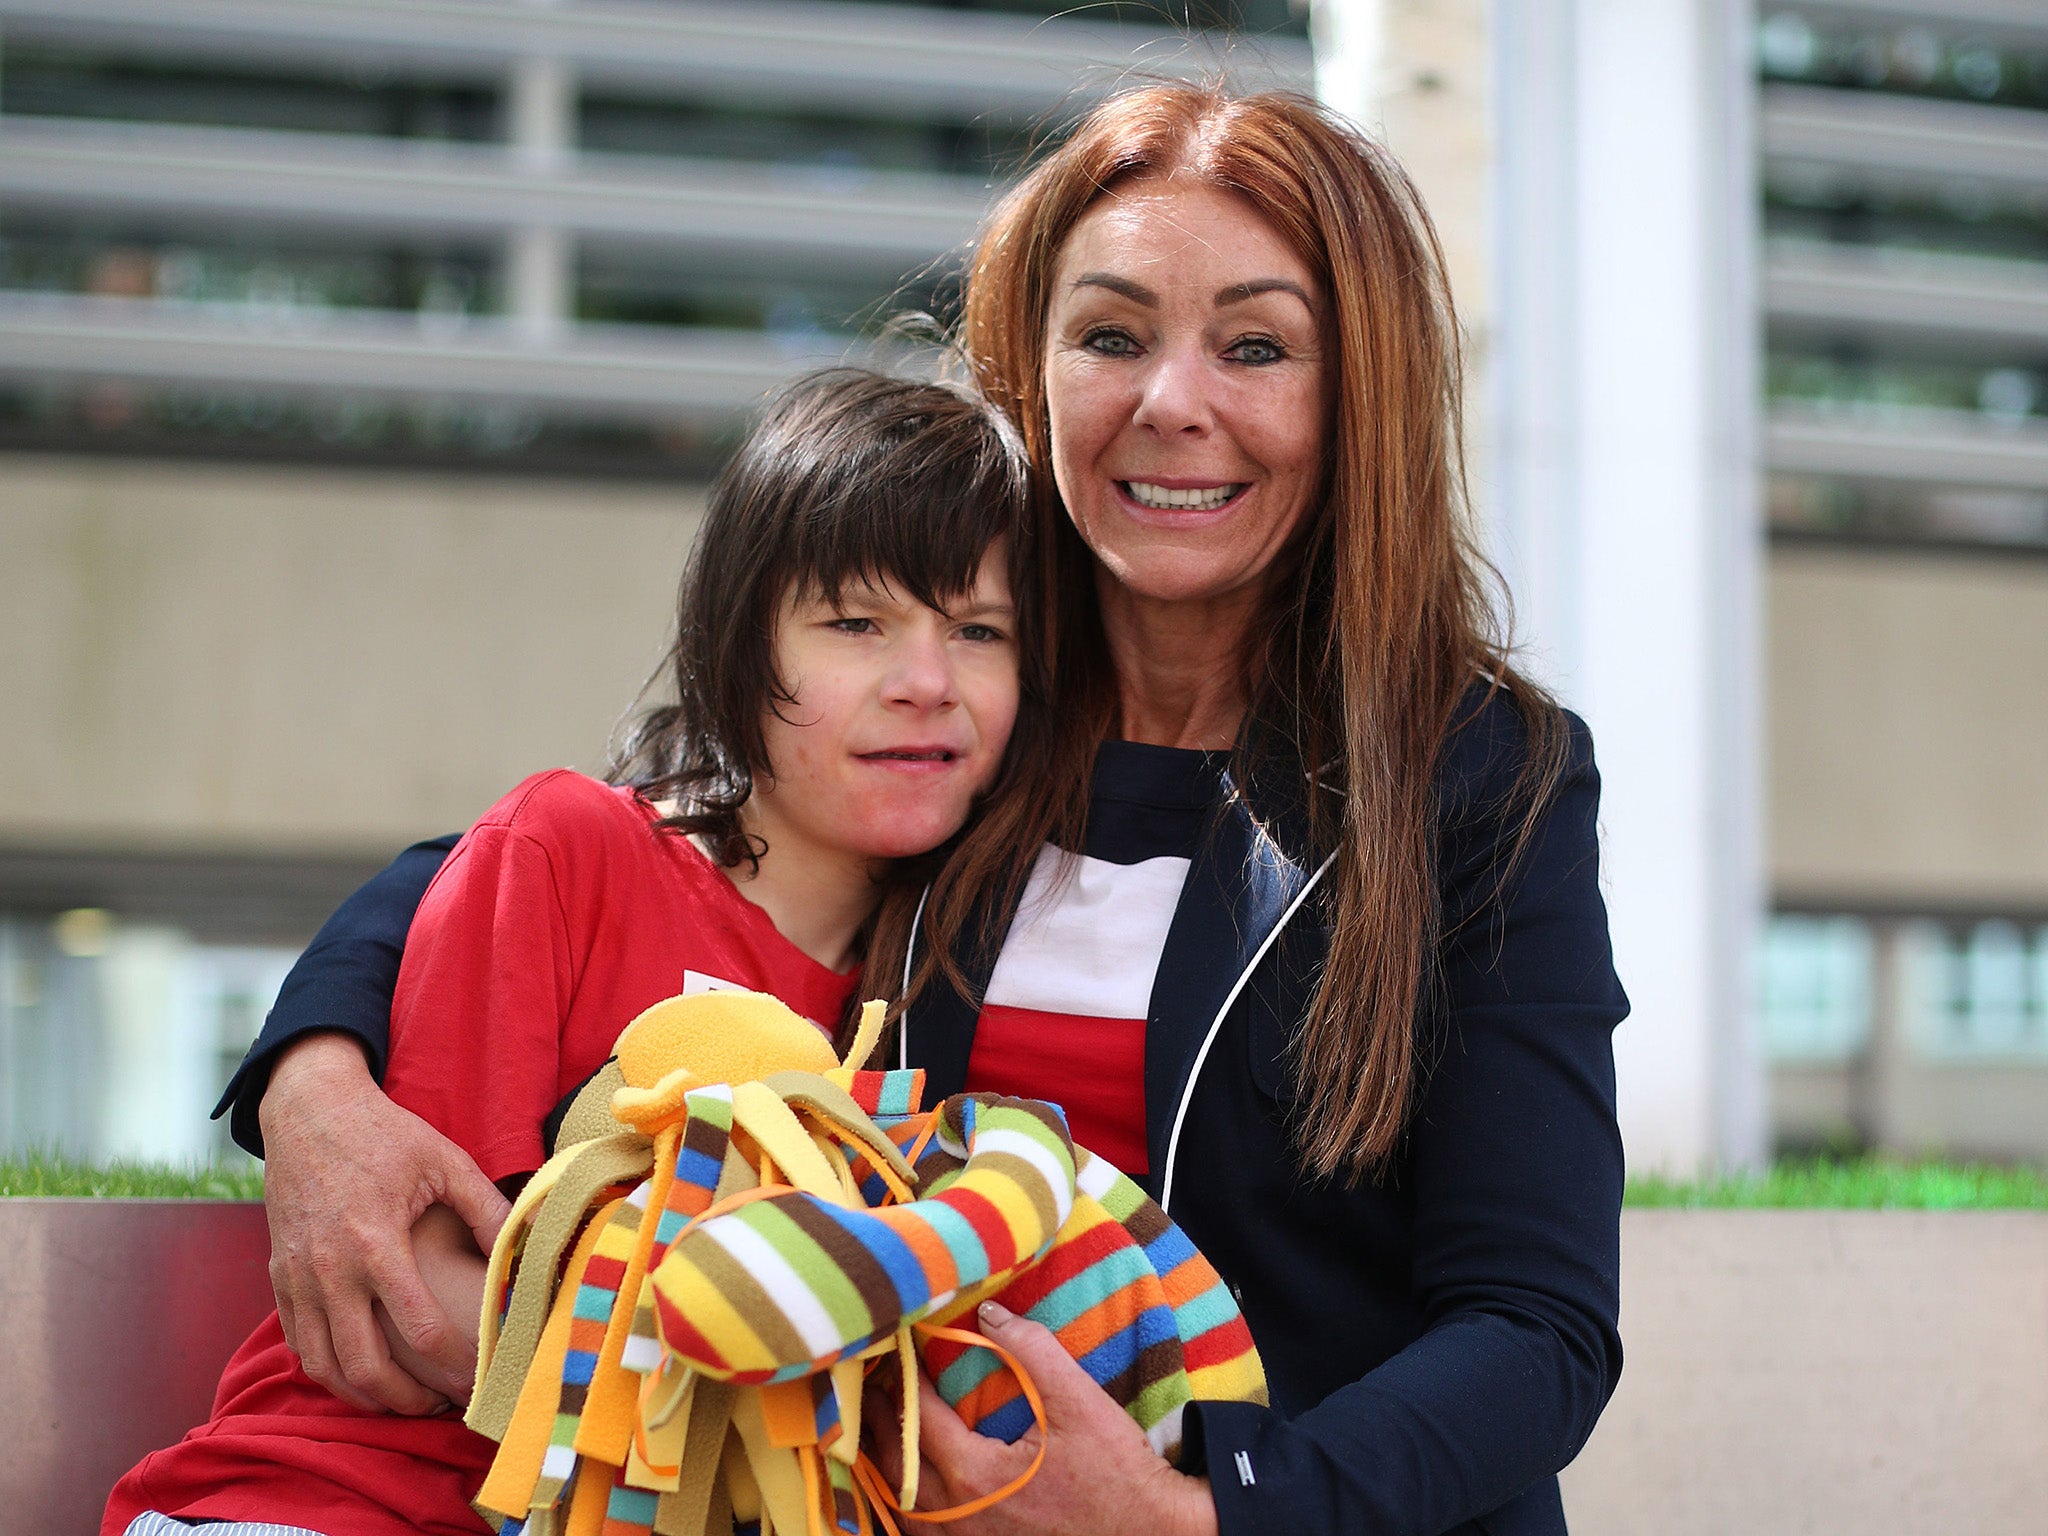 The case of 12-year-old Billy Caldwell, and the determined campaign of his mother, Charlotte, has, as she said, 'bust the political process wide open'